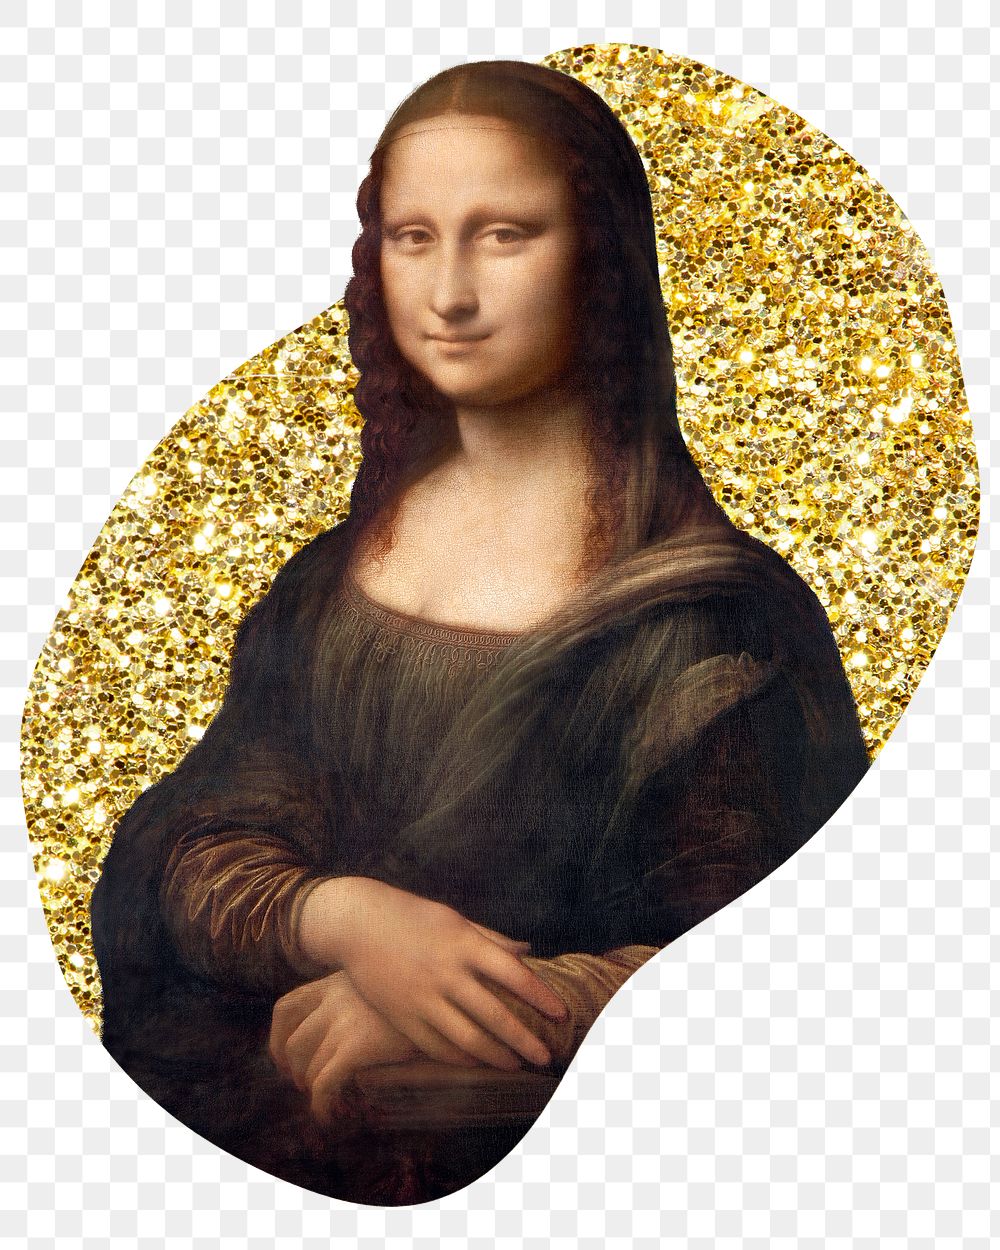 Mona Lisa png badge sticker, Vinci's famous painting, gold glitter blob shape, transparent background remixed by rawpixel